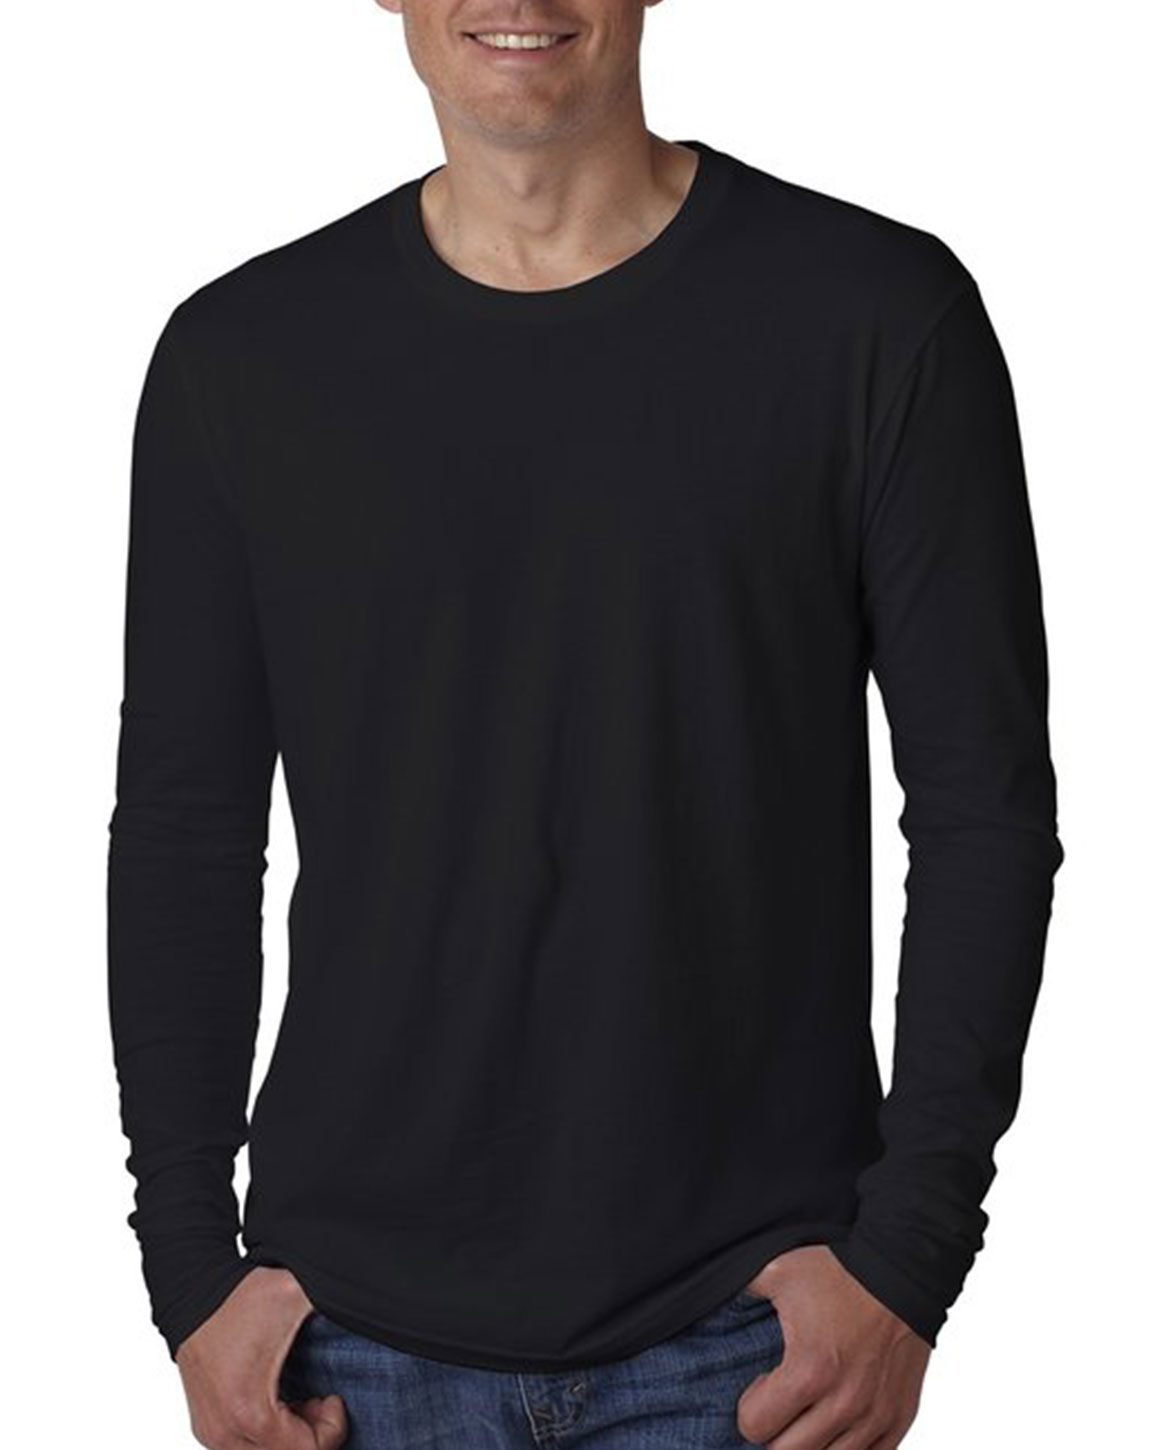 Next Level N3601 Mens Premium Fitted Long-Sleeve Crew Tee